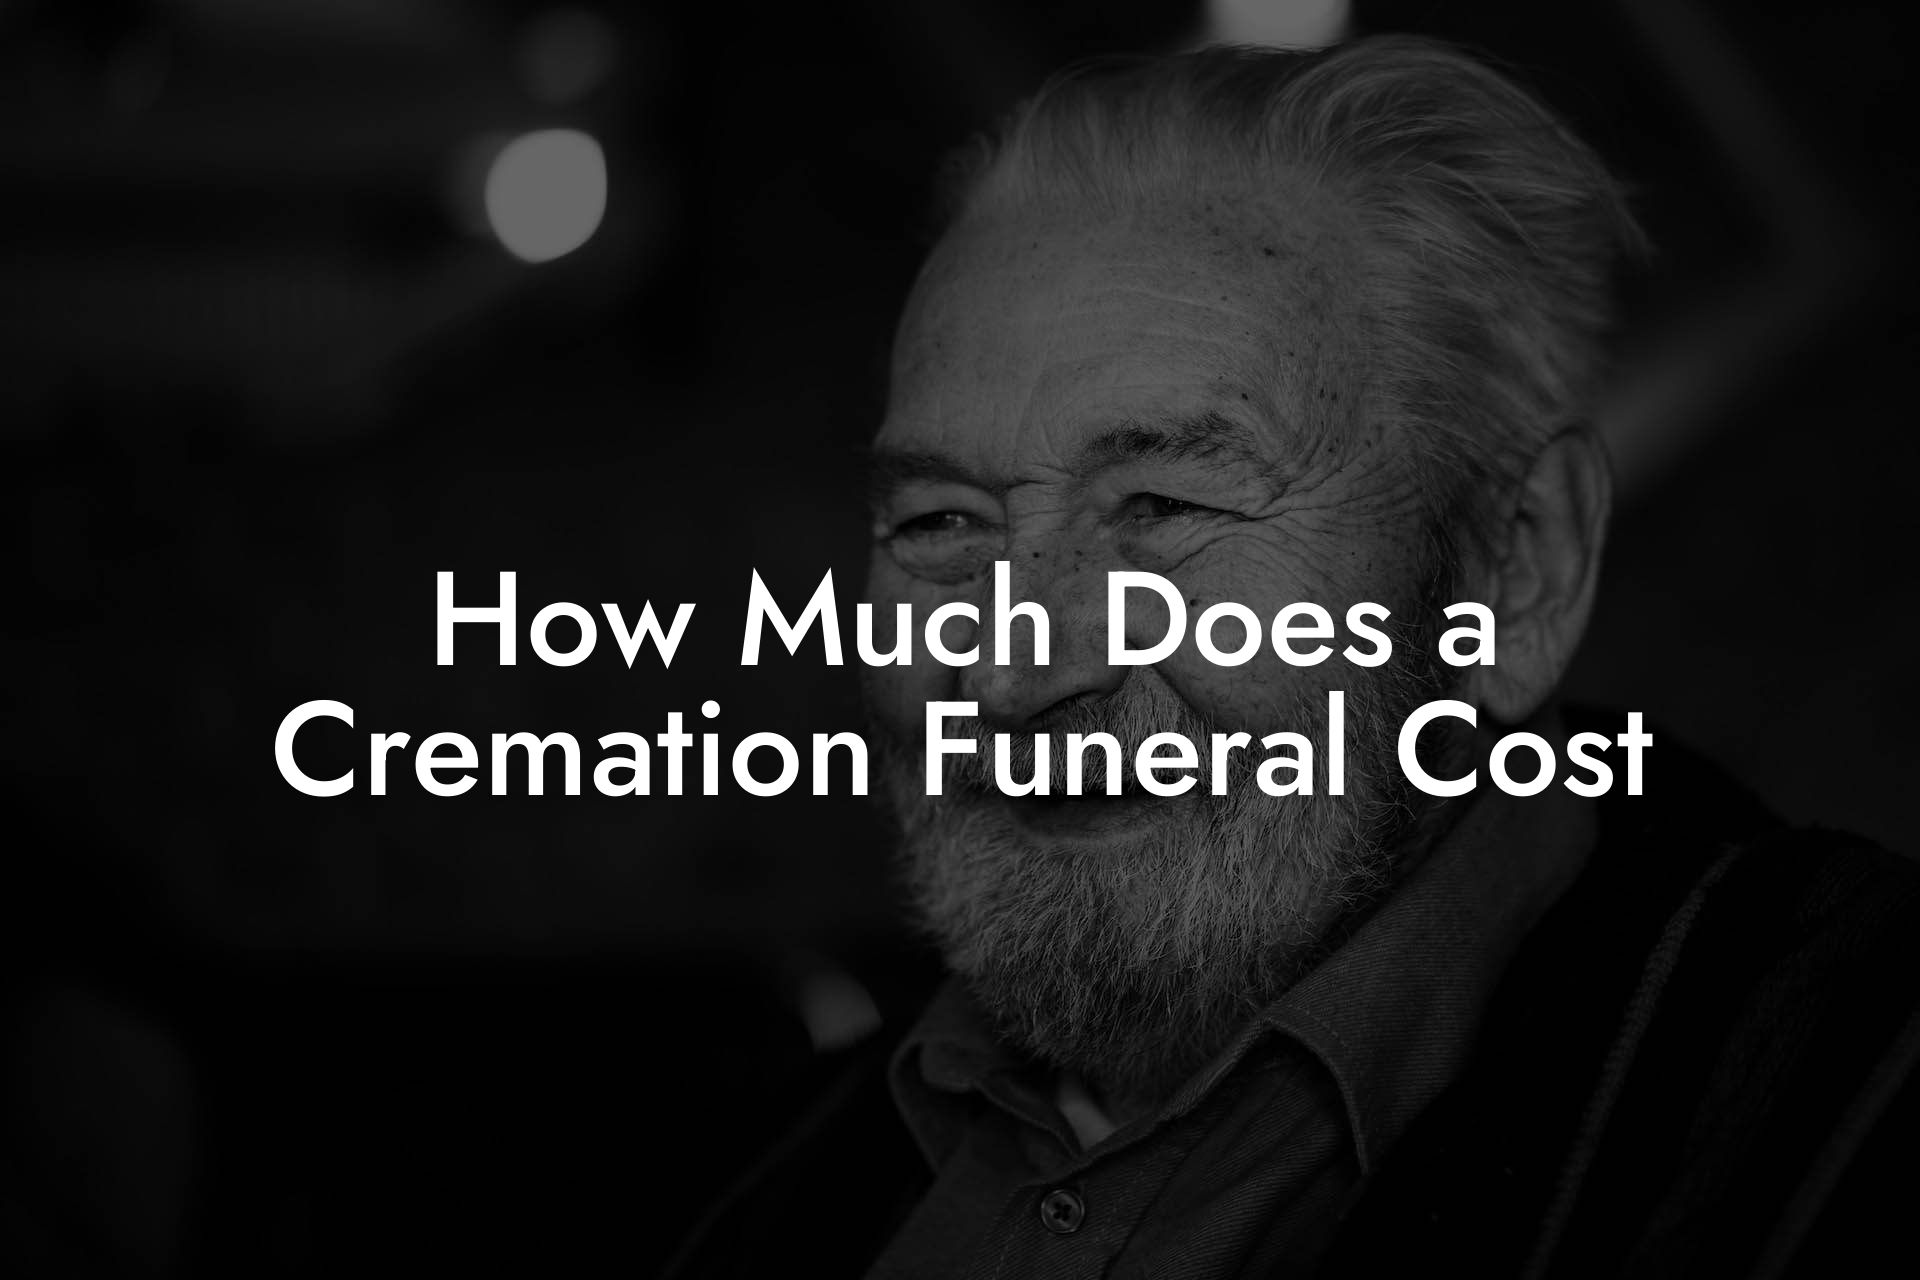 How Much Does a Cremation Funeral Cost